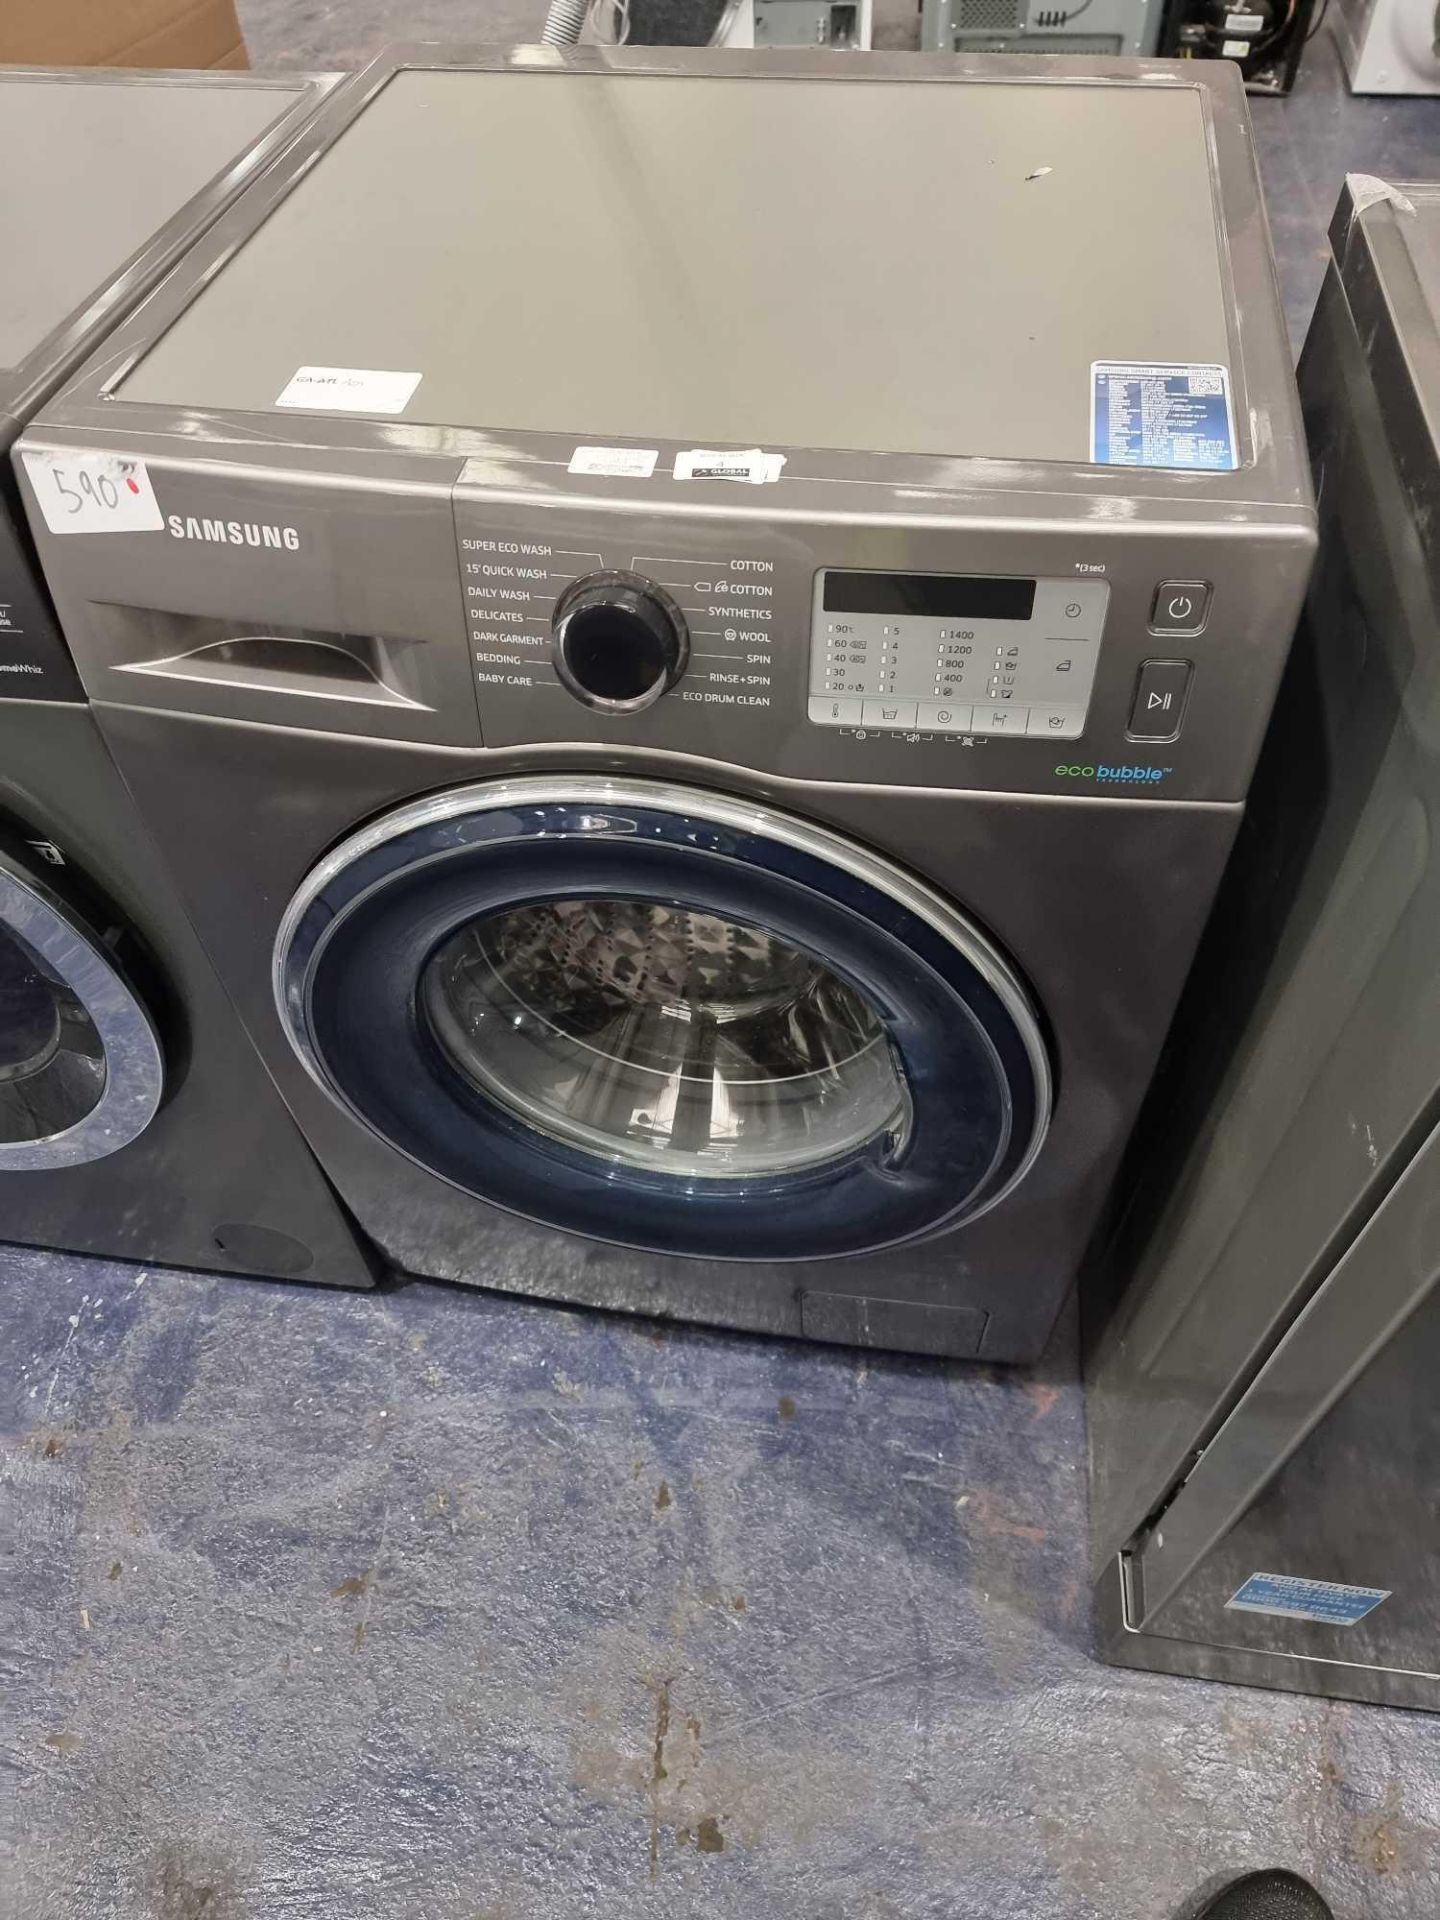 (Sp) RRP £650 Lot To Contain 1 Ww80J5555 Samsung Washing Machine With Ecobubble - Image 4 of 4